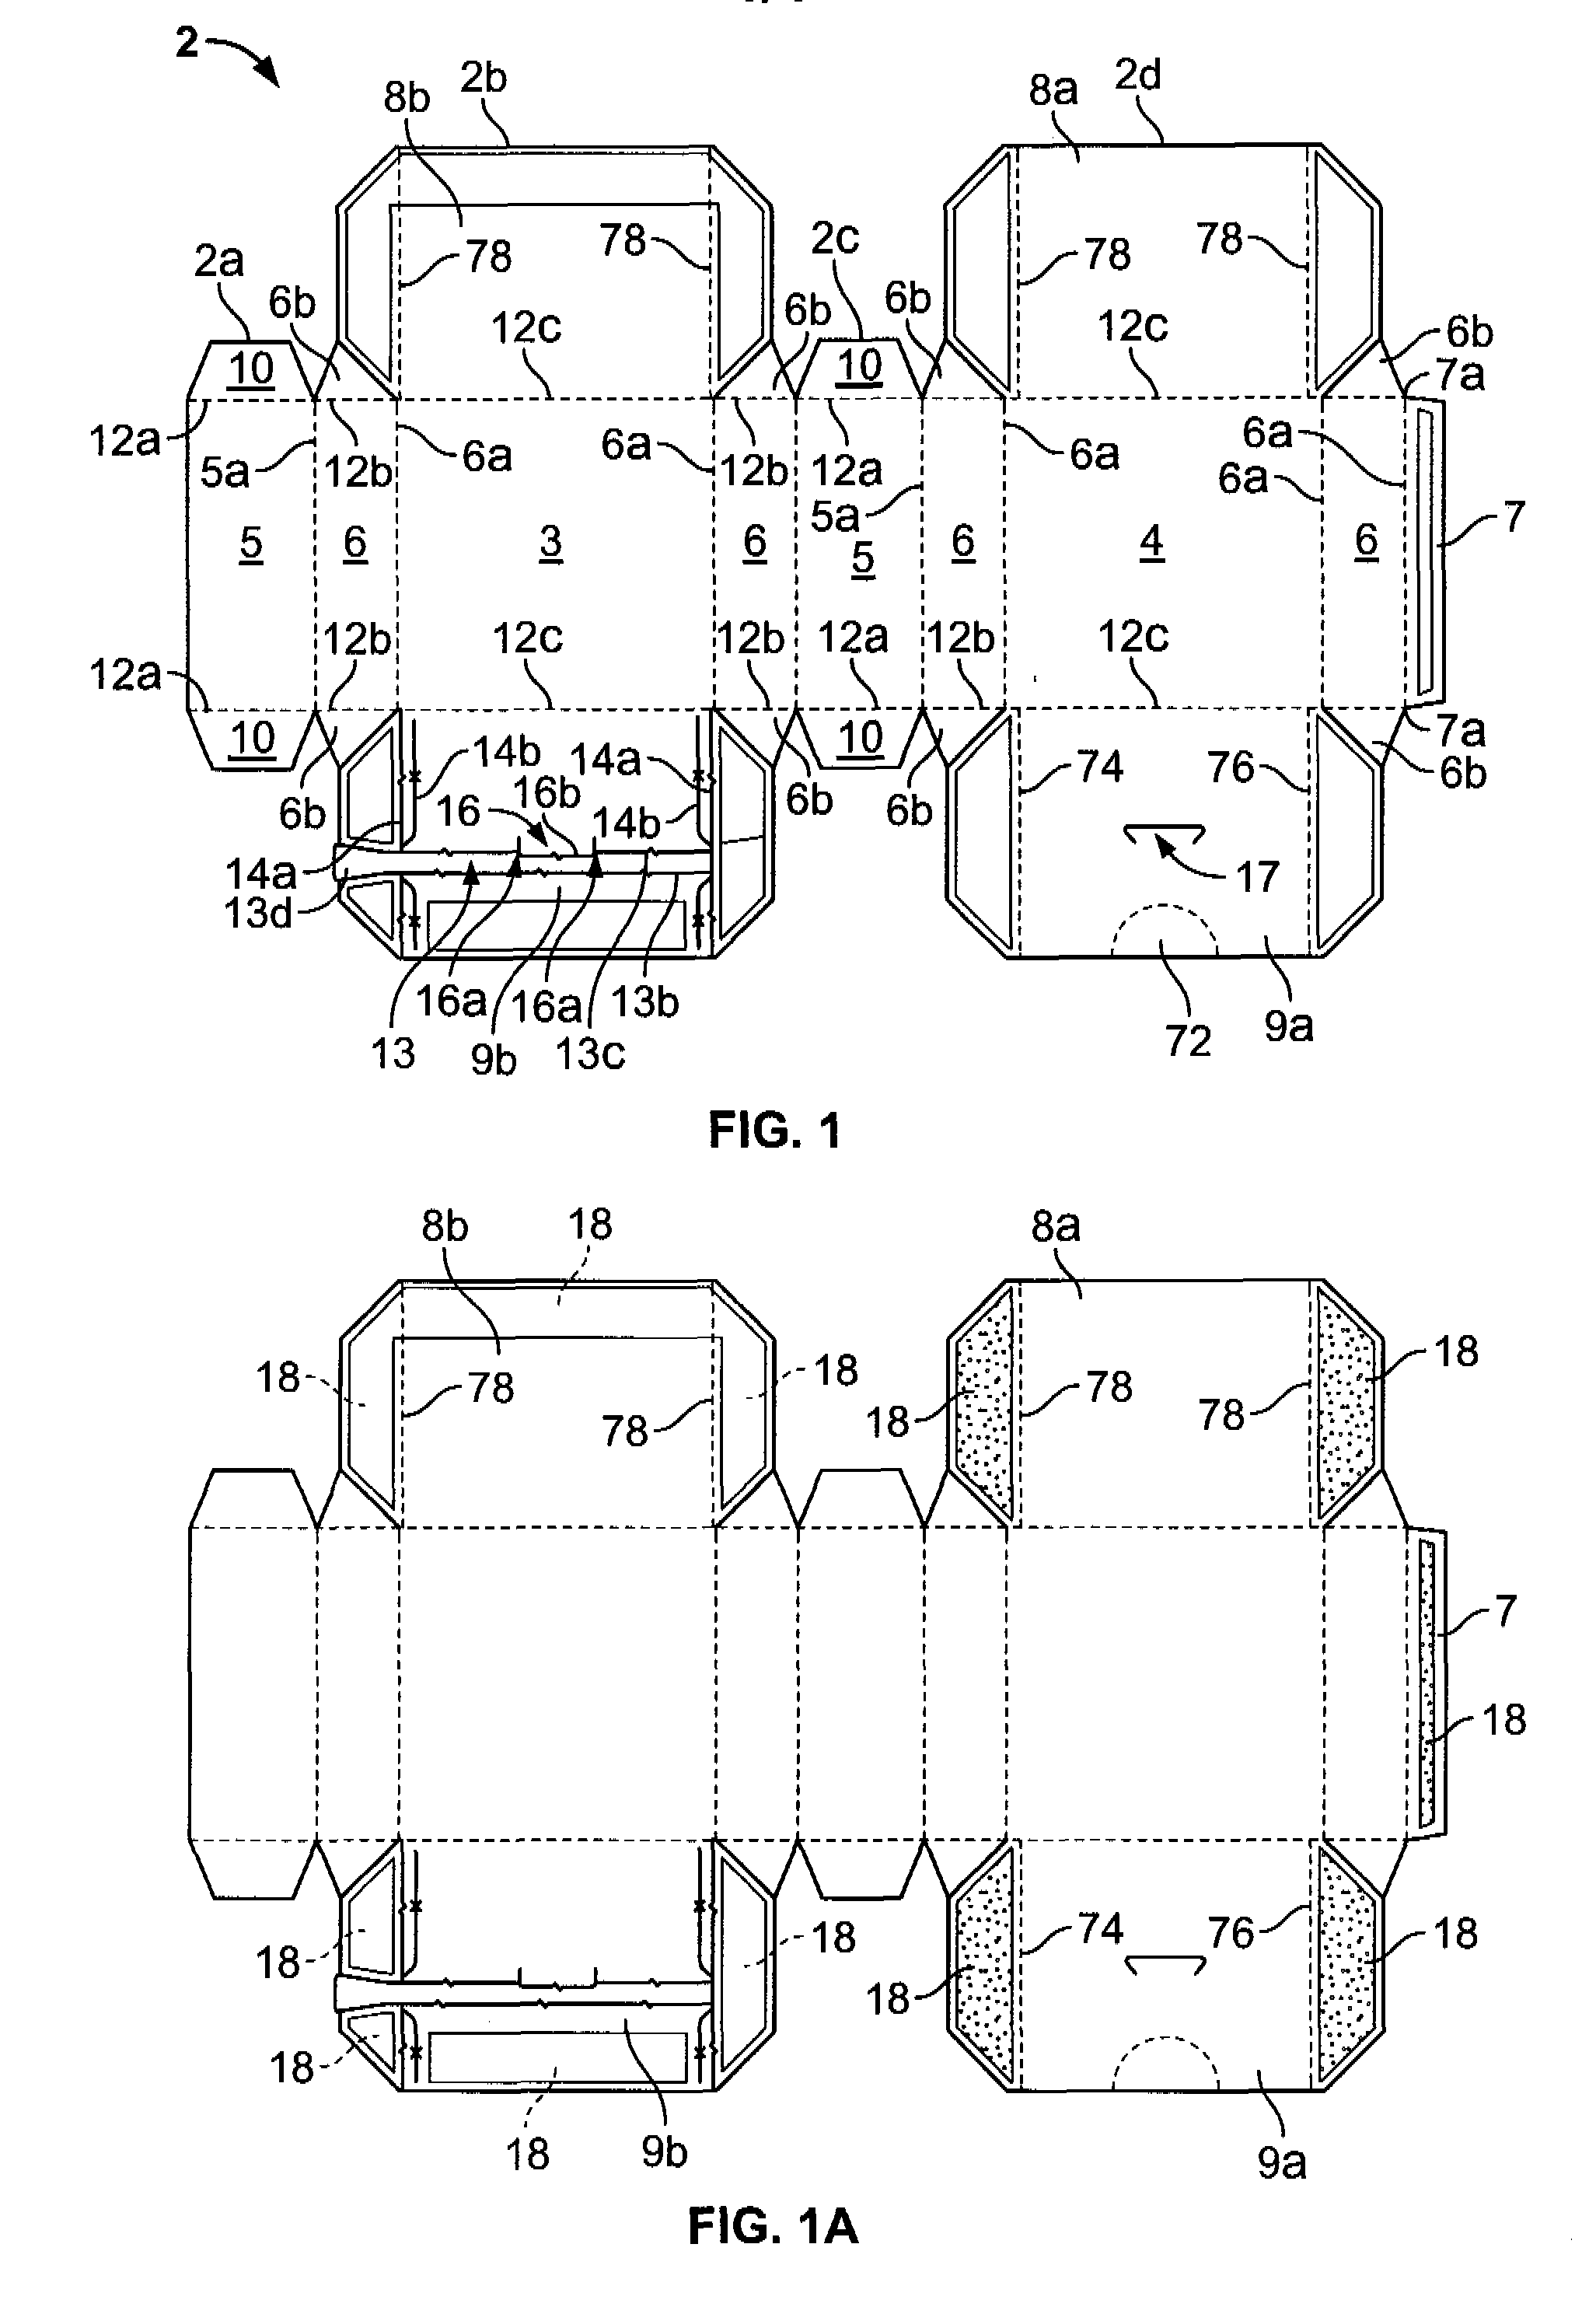 Anti-sifting polygonal carton and methods of assembly